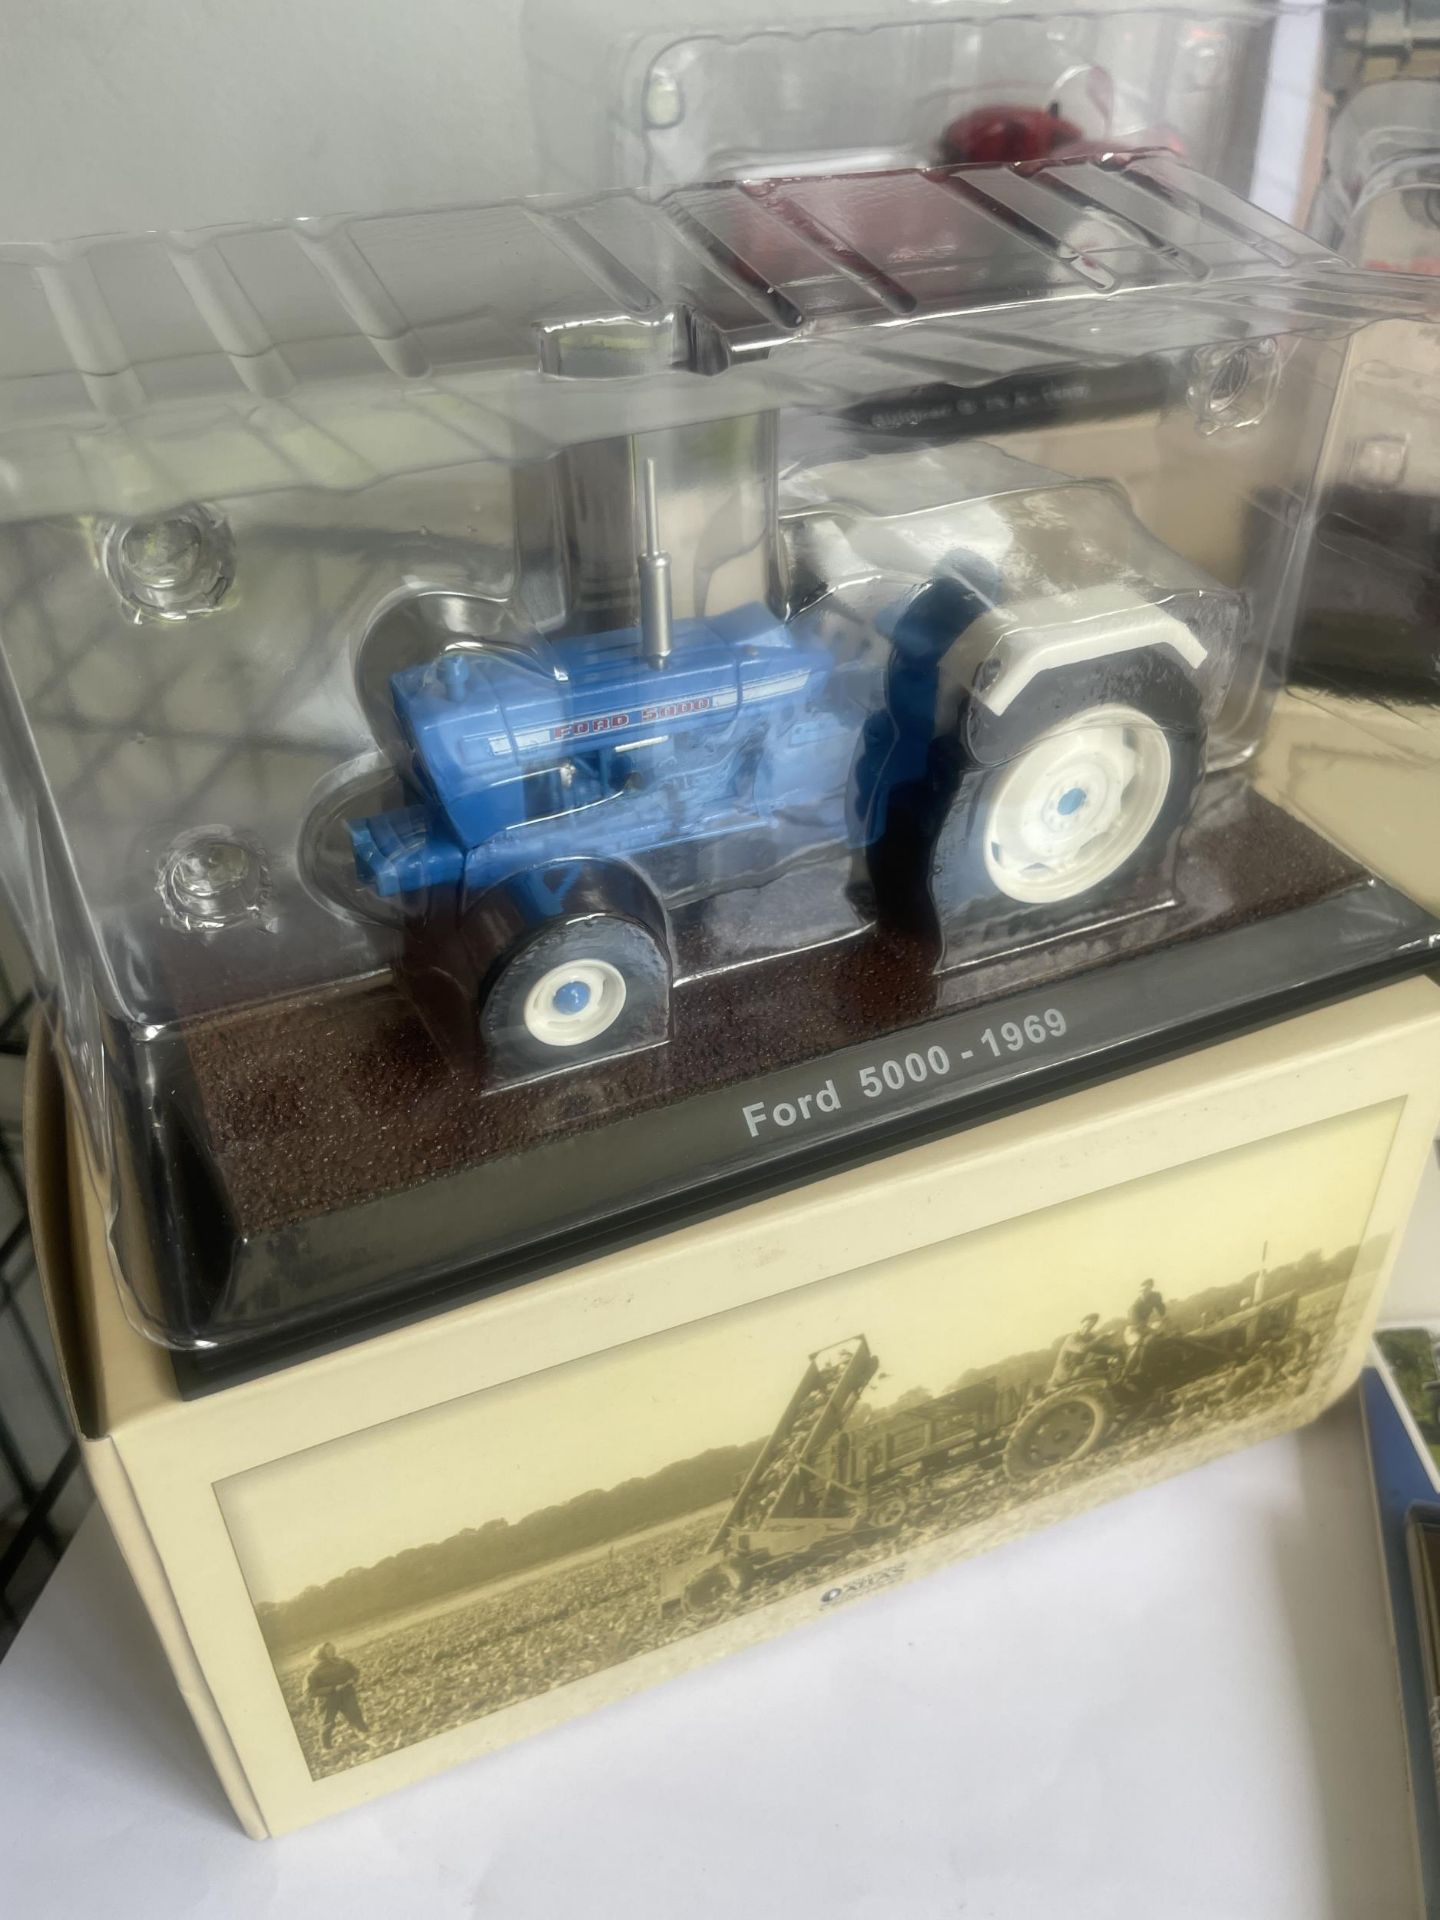 FIVE AS NEW AND BOXED ATLAS MODEL TRACTORS WITH BOOK, DVD AND TWO POSTERS ALL WITH COA - Image 5 of 7